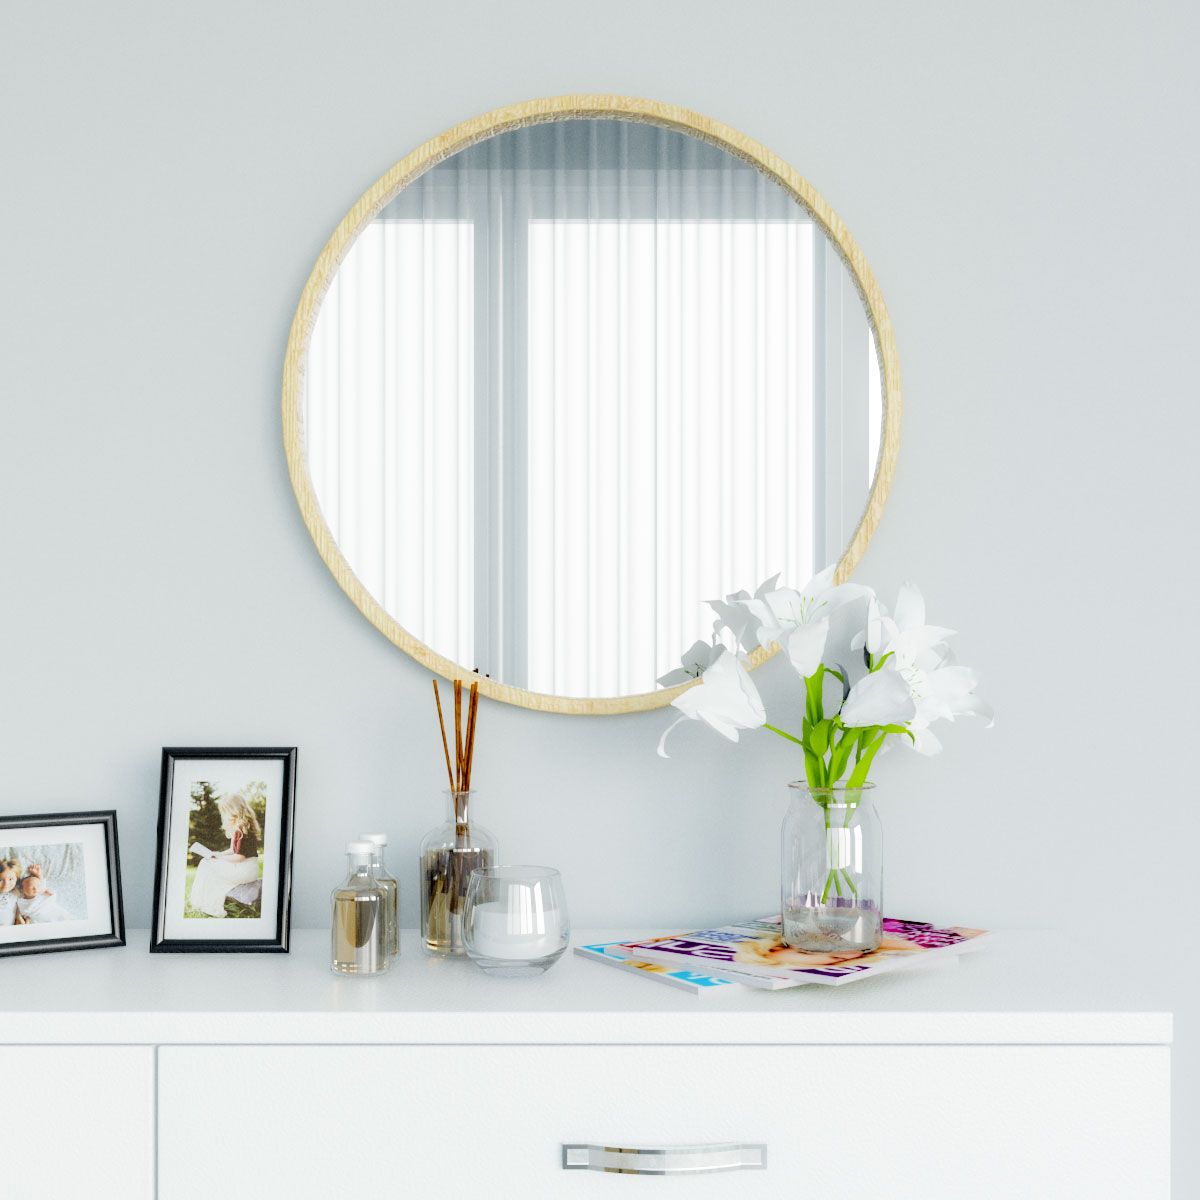 10 Best Round Wall Mirror In 2020 – Roomdsign Within Round Grid Wall Mirrors (View 15 of 15)